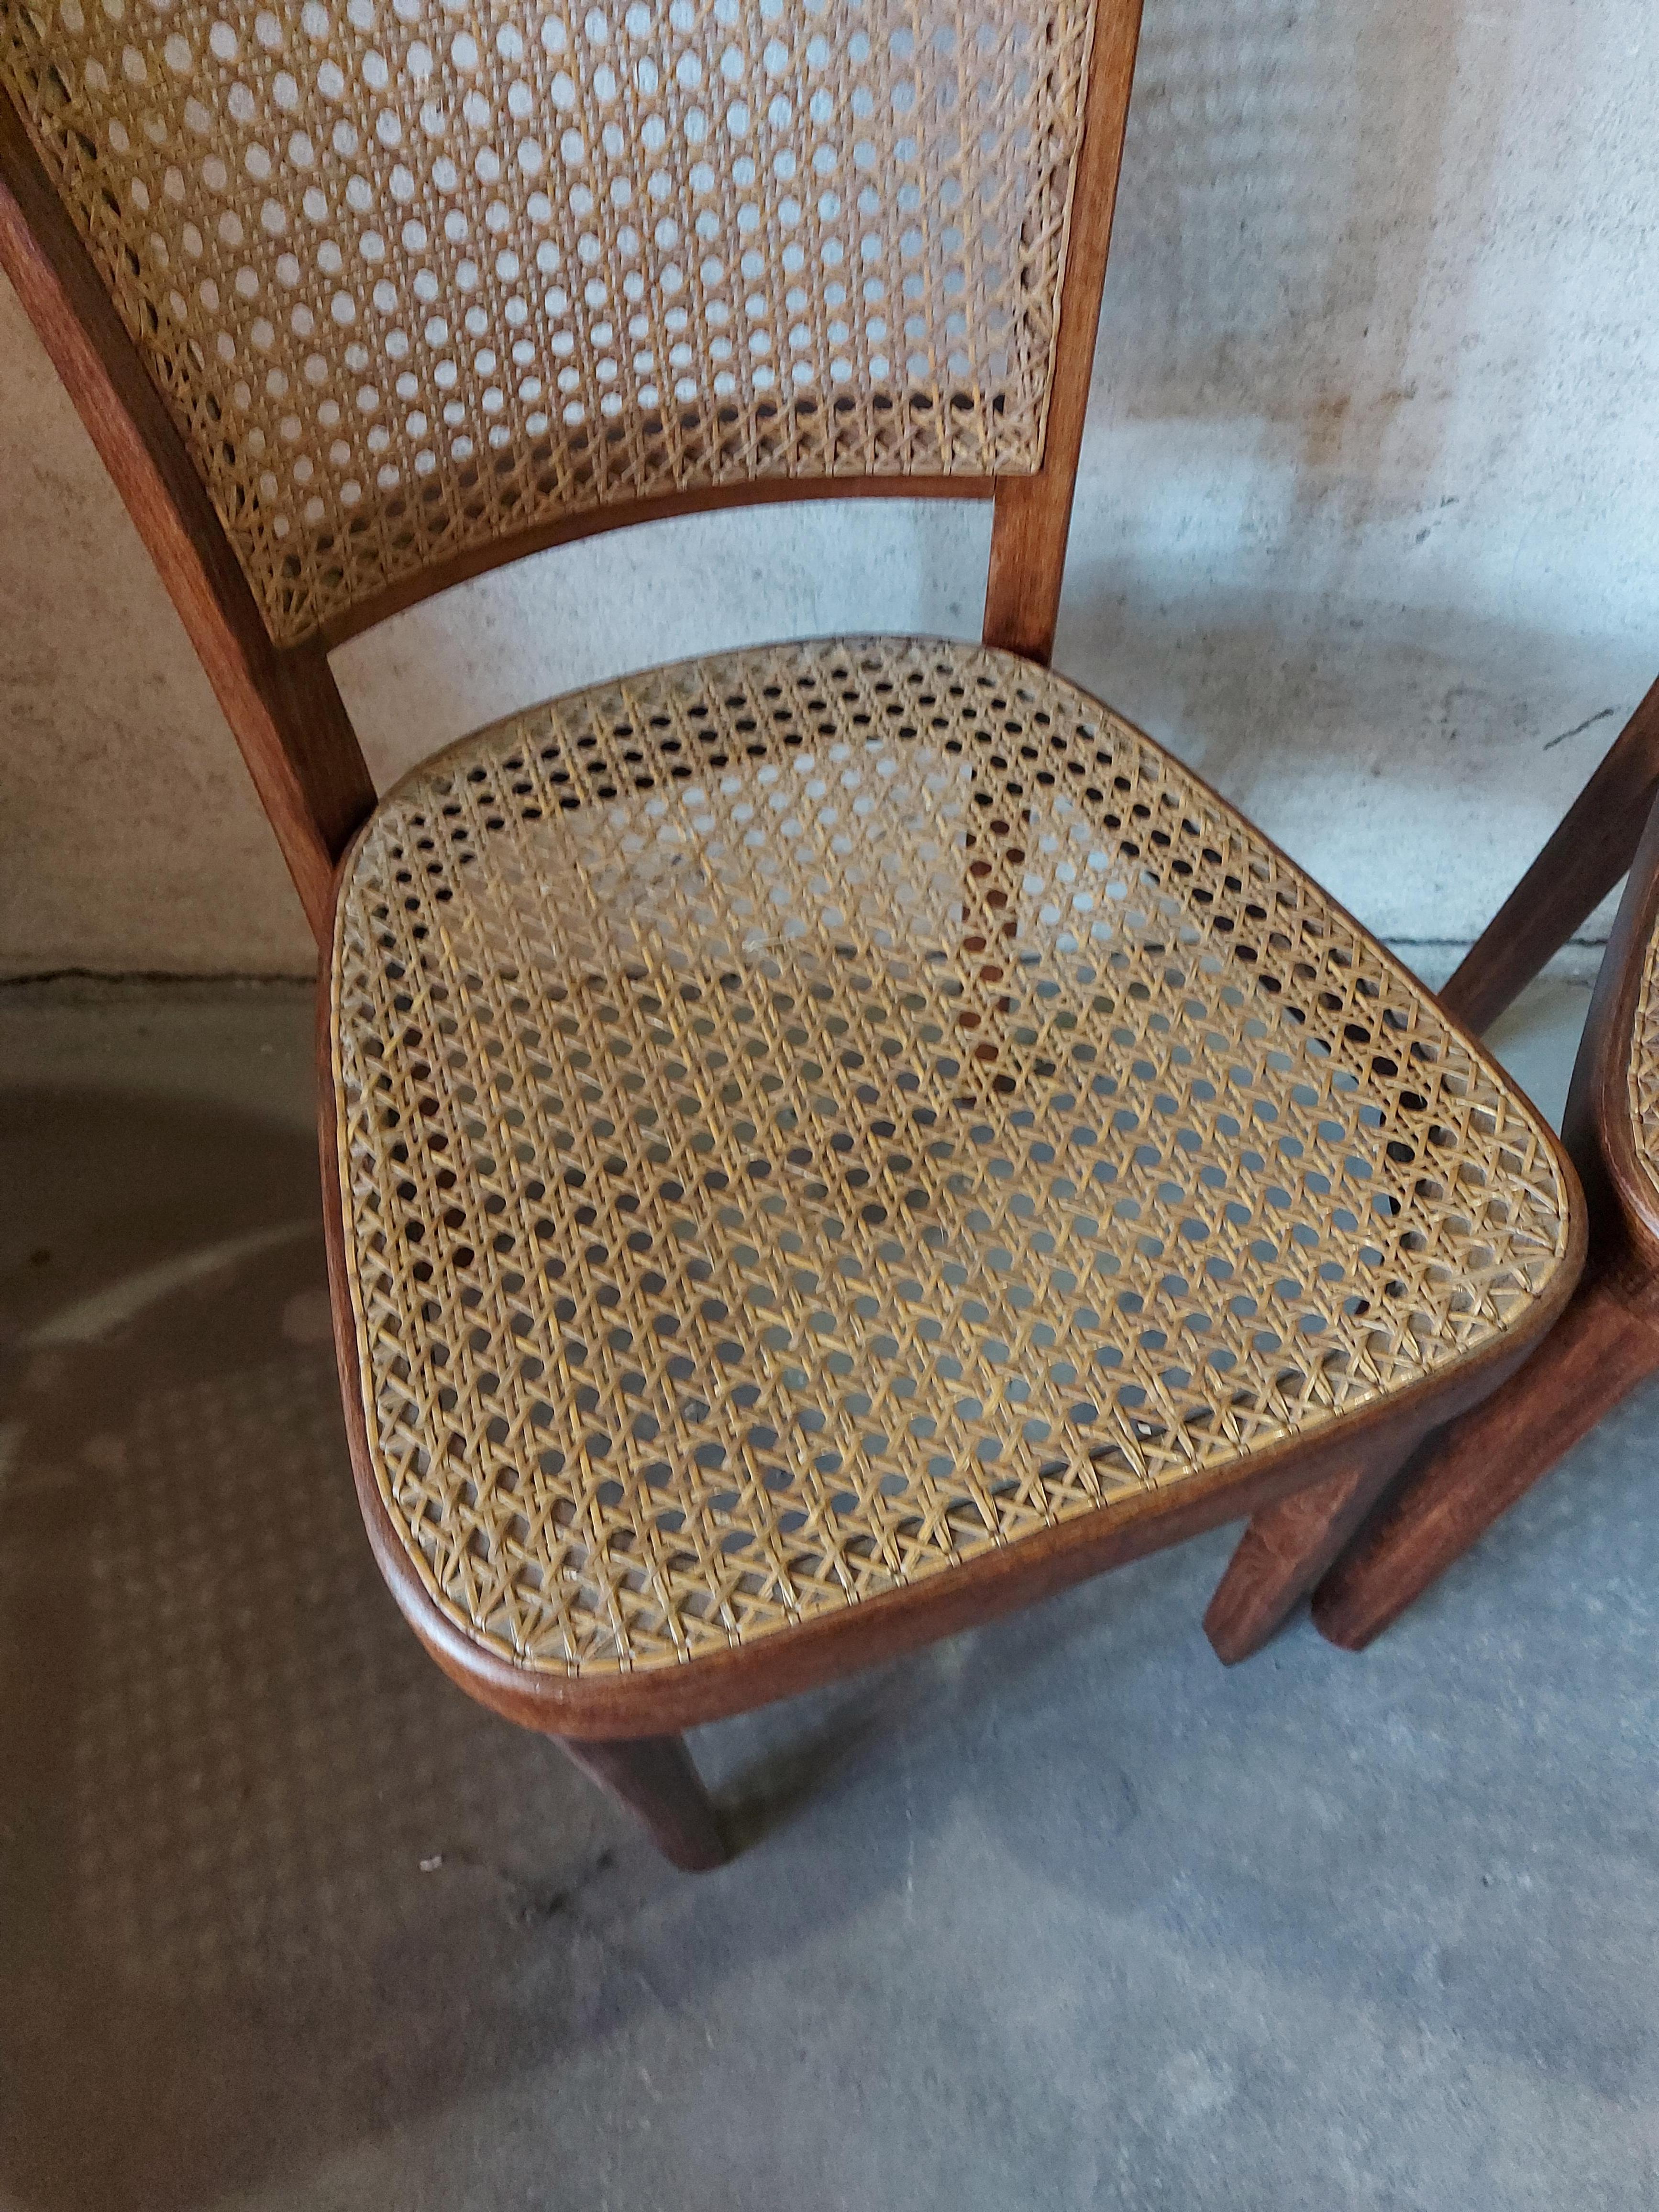 Bentwood cane Chairs 1930s

Producer: STOL Kamnik

Condition: Great vintage condition with beautiful patina (detailed finish).

Rare find.